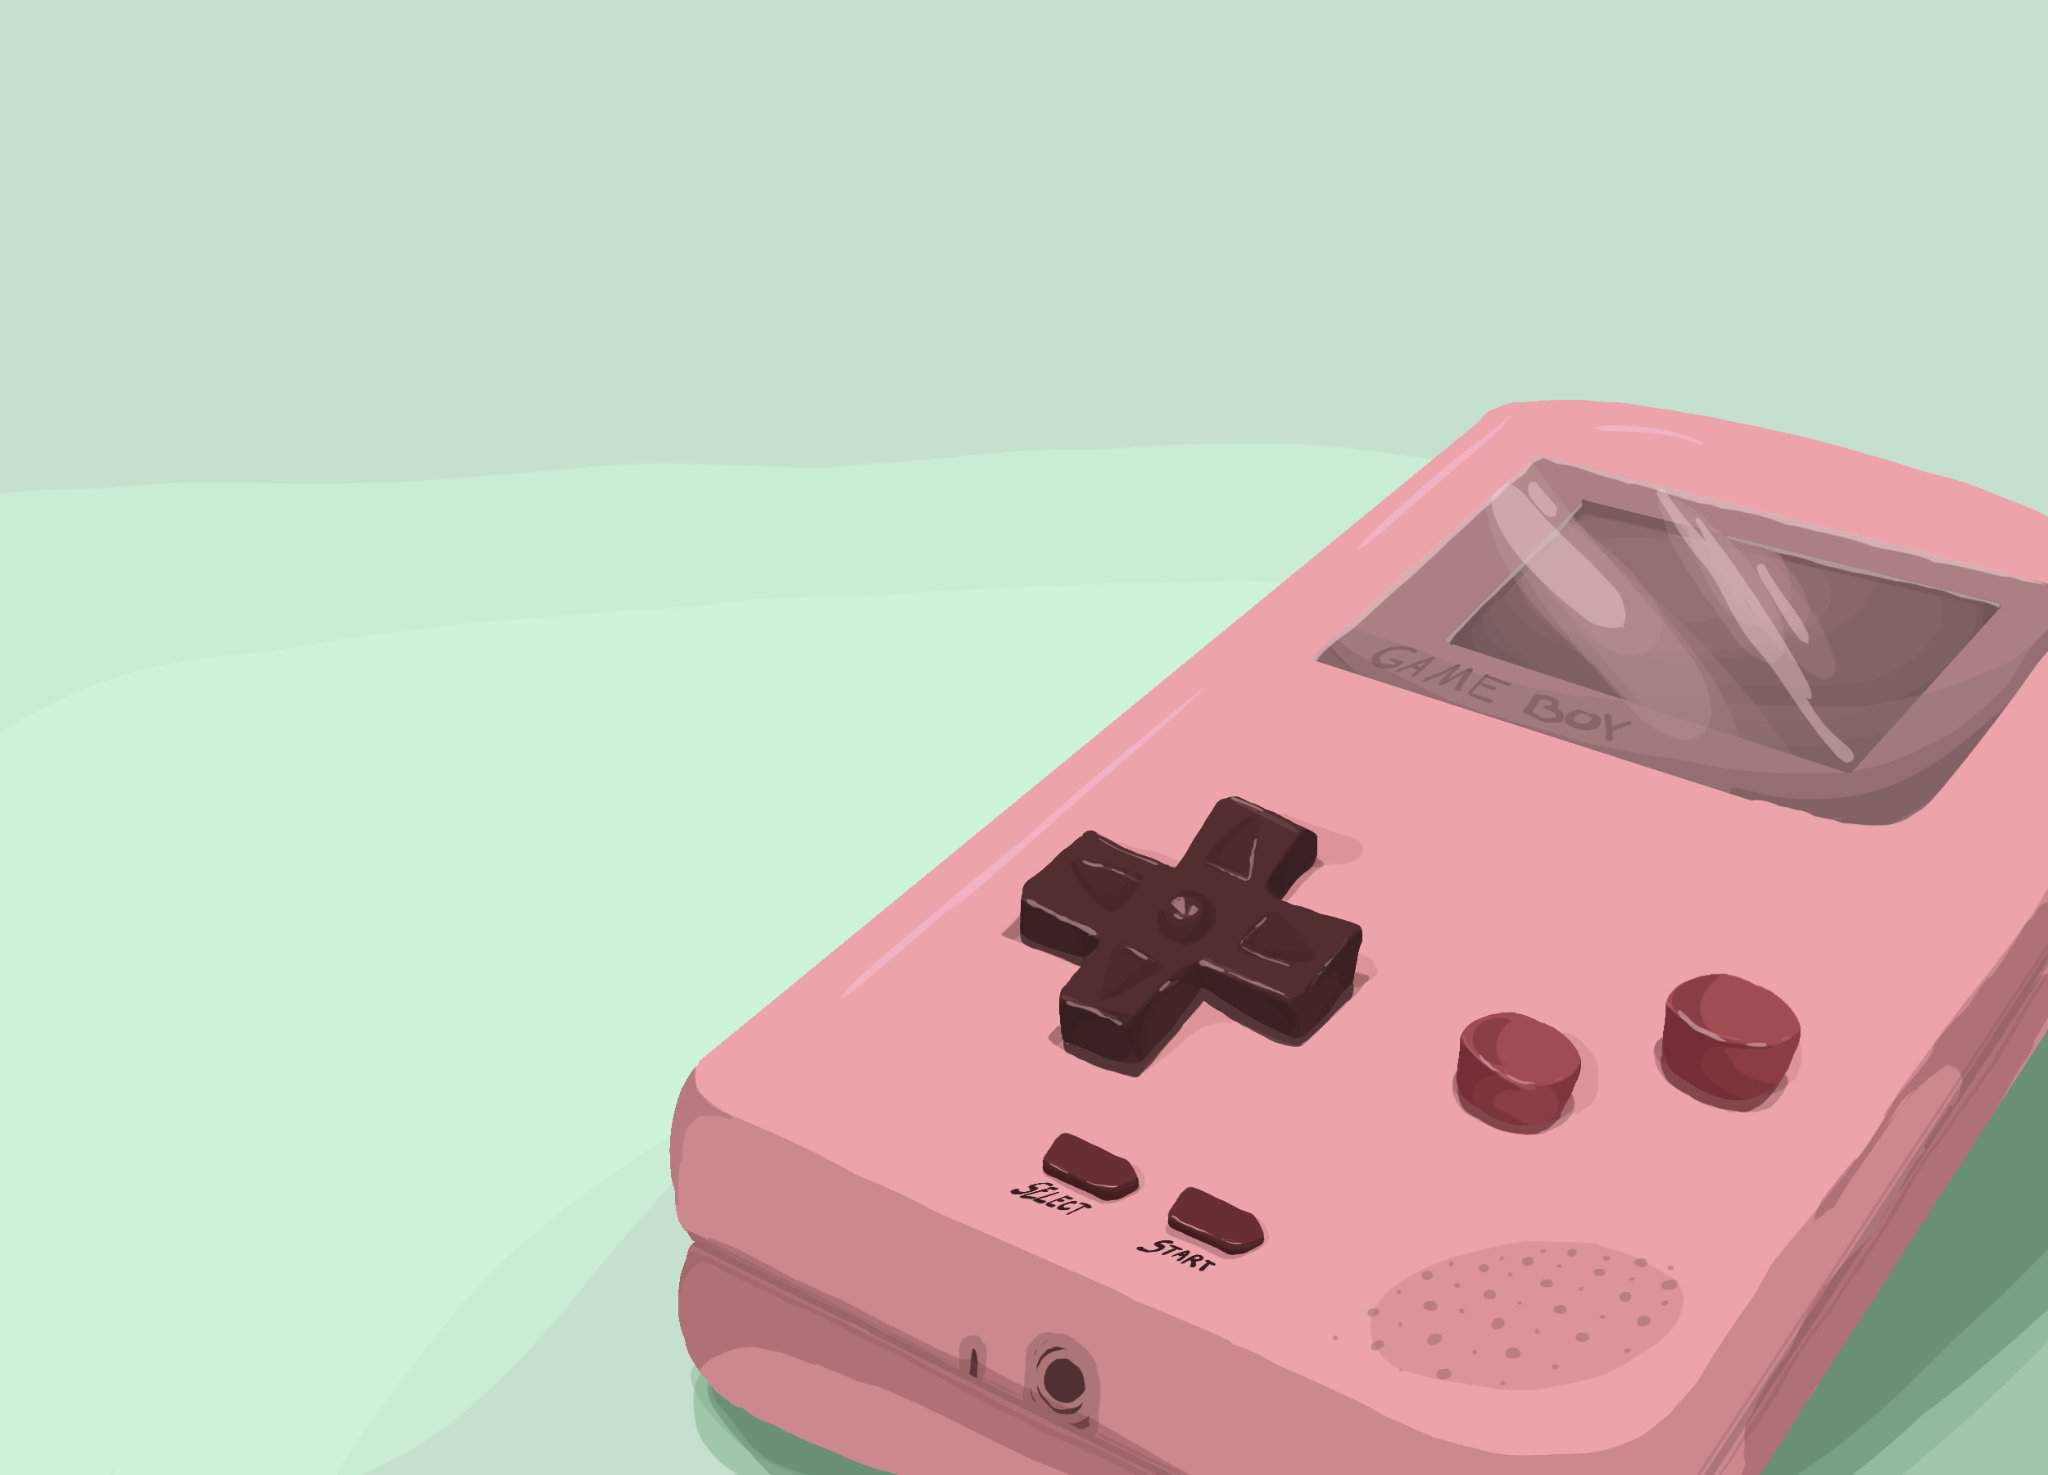 A pink Gameboy sitting on a green table. - Game Boy